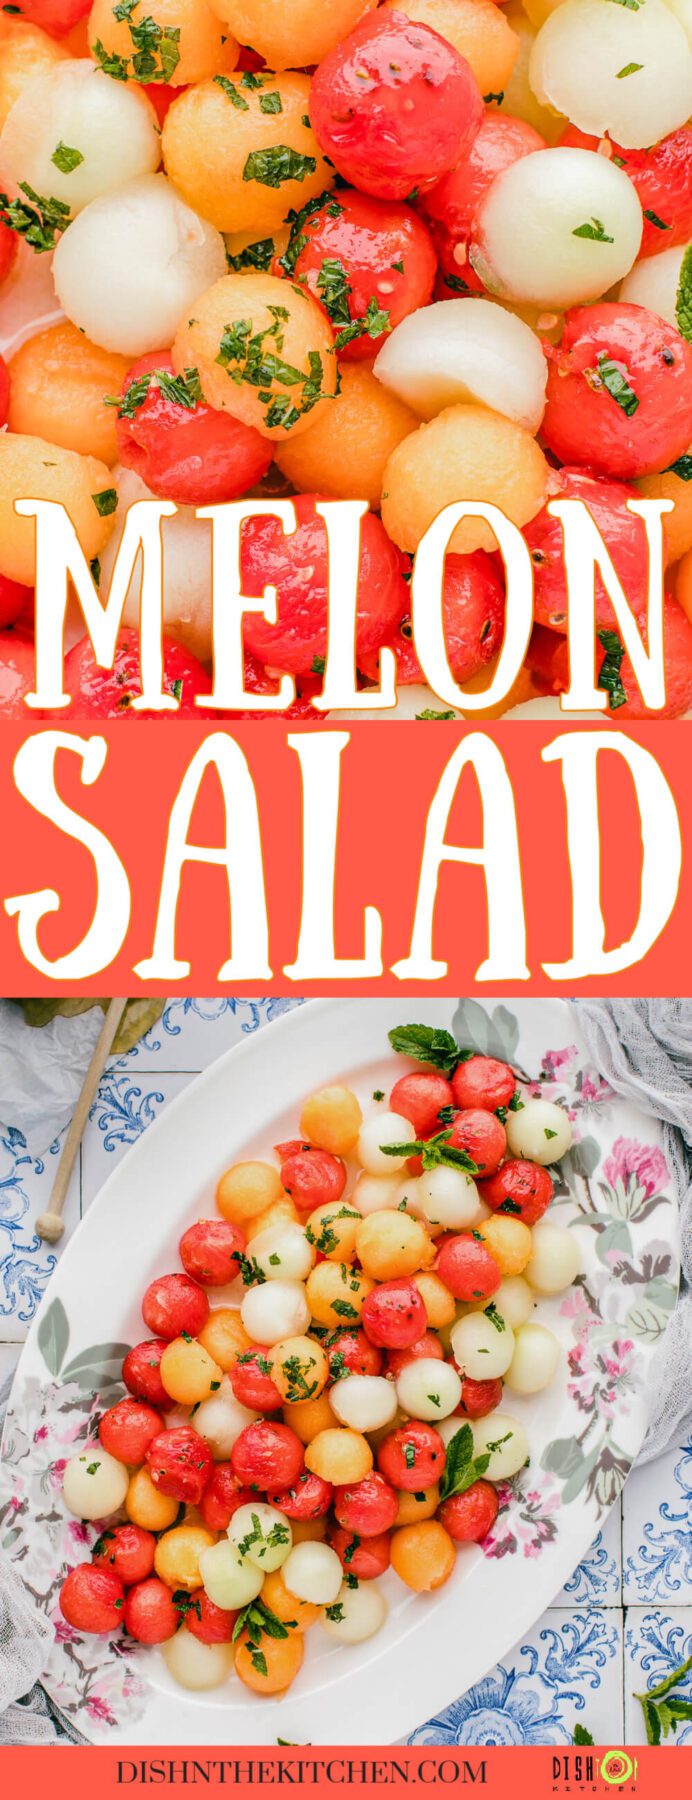 Pinterest image featuring melon salad arranged on an oval platter and up close.